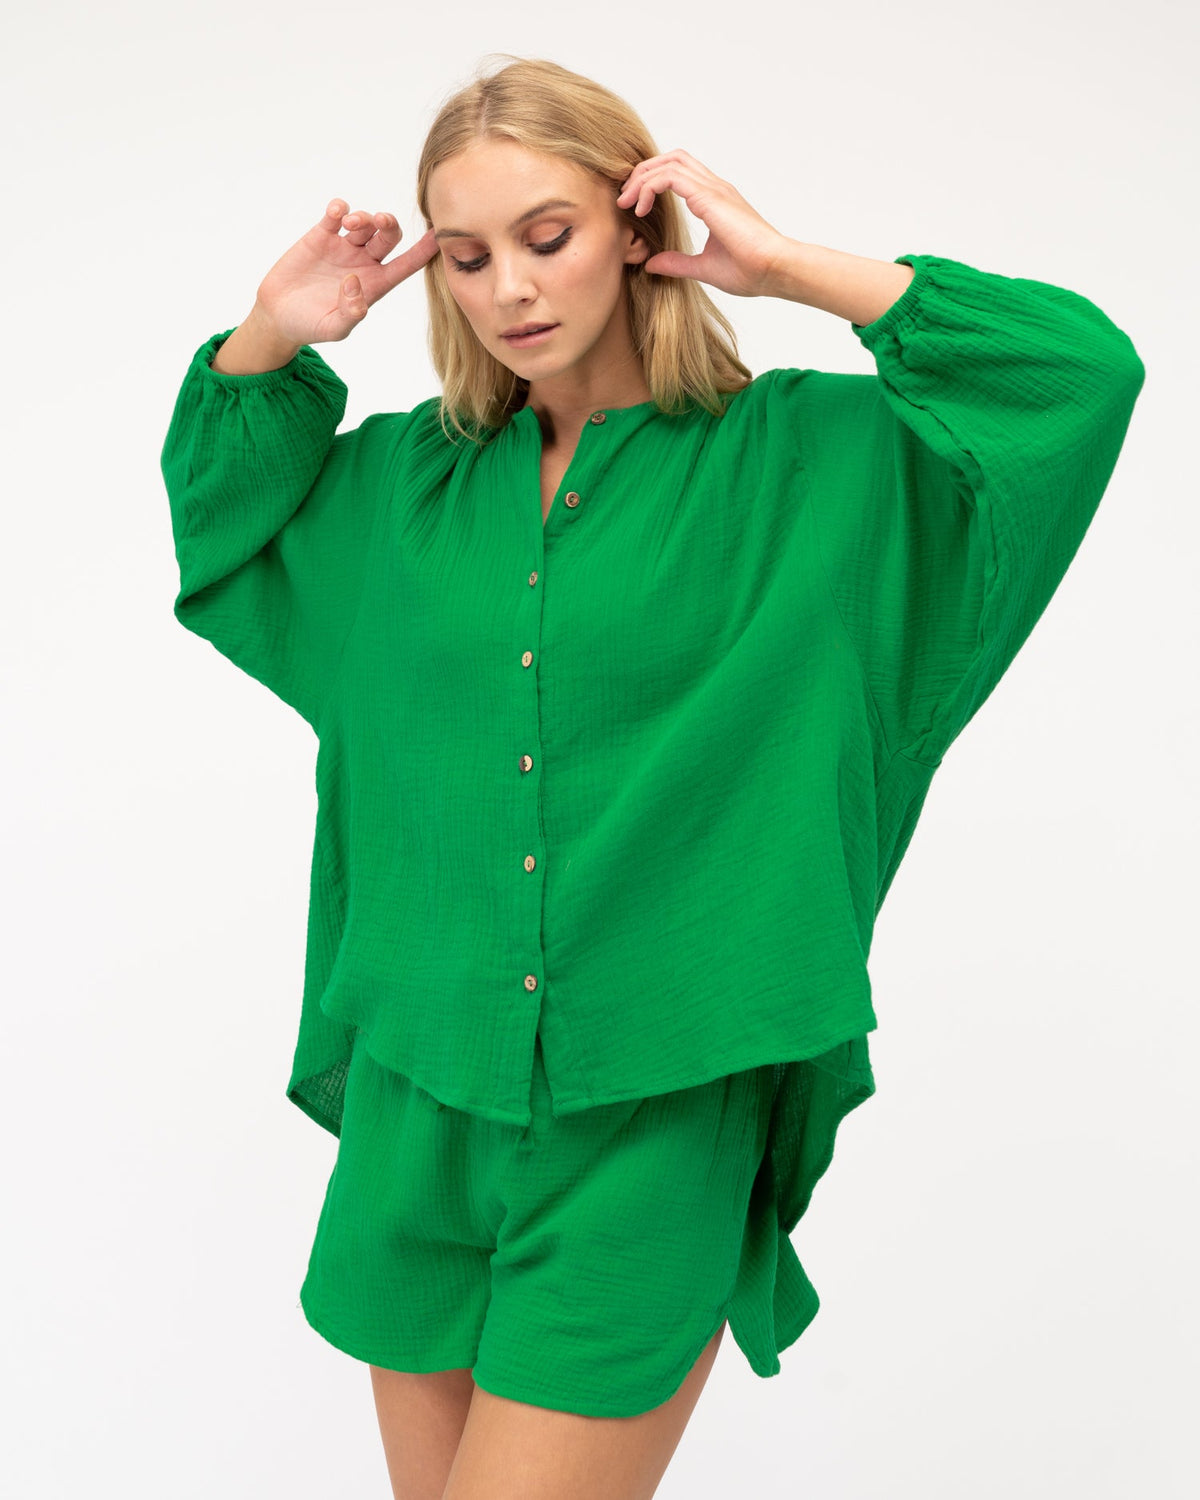 A girl wearing a long sleeve cotton shirt in a bright green colour featuring button-through design with coconut buttons and elasticated cuffs by Global Fashion House.